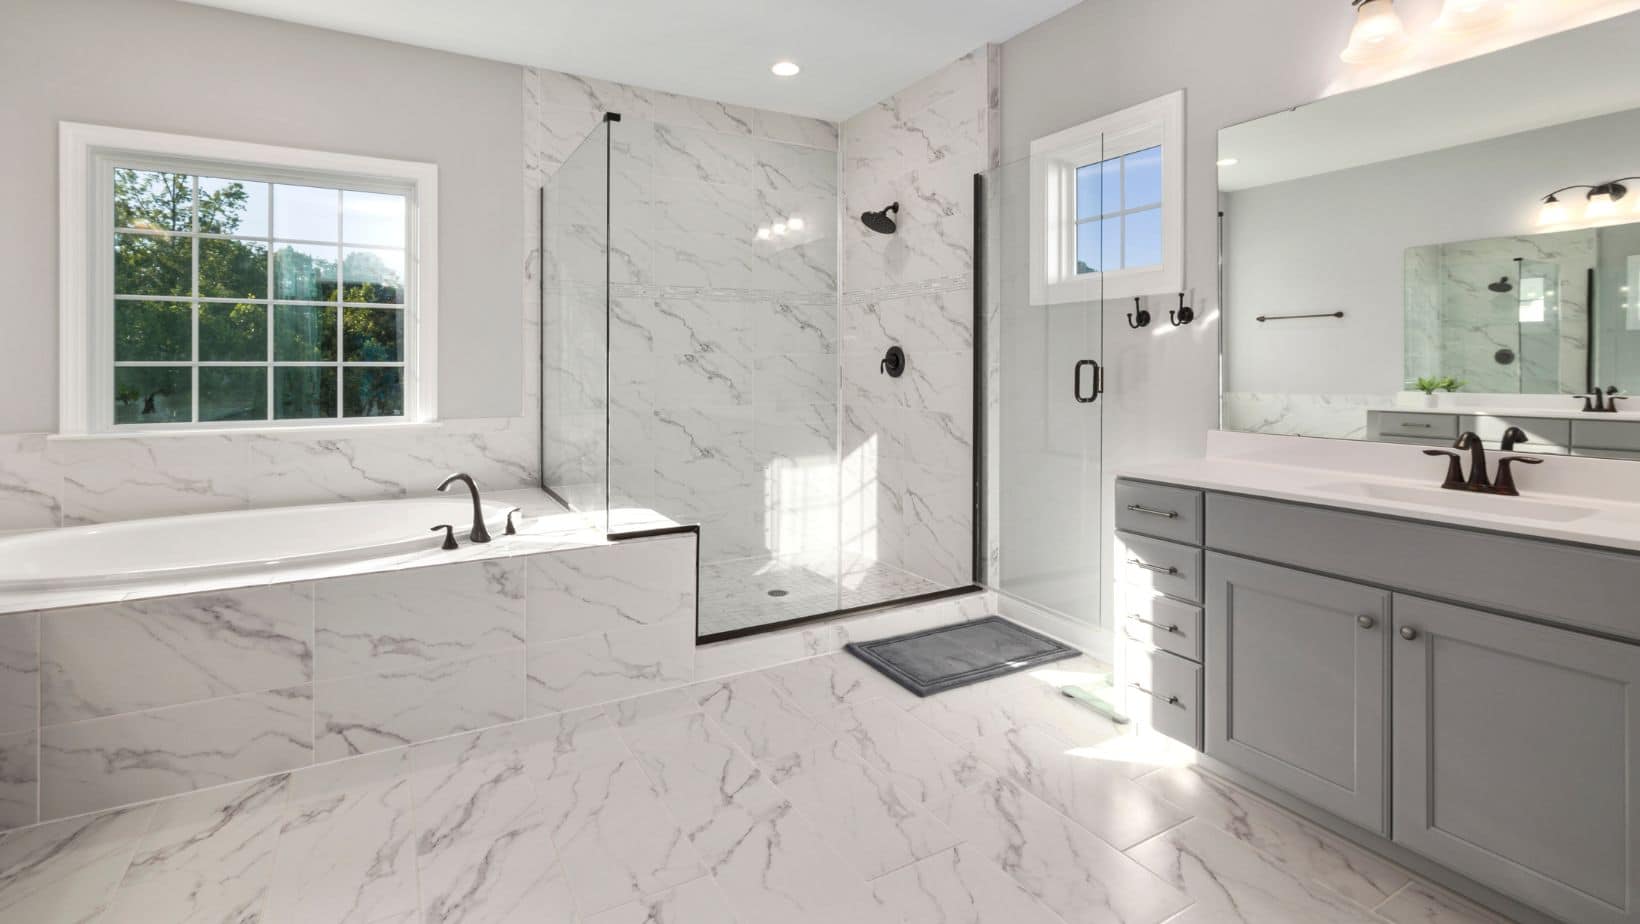 Luxury white bathroom with bath tub, shower and grey bathroom cabinets with white countertop